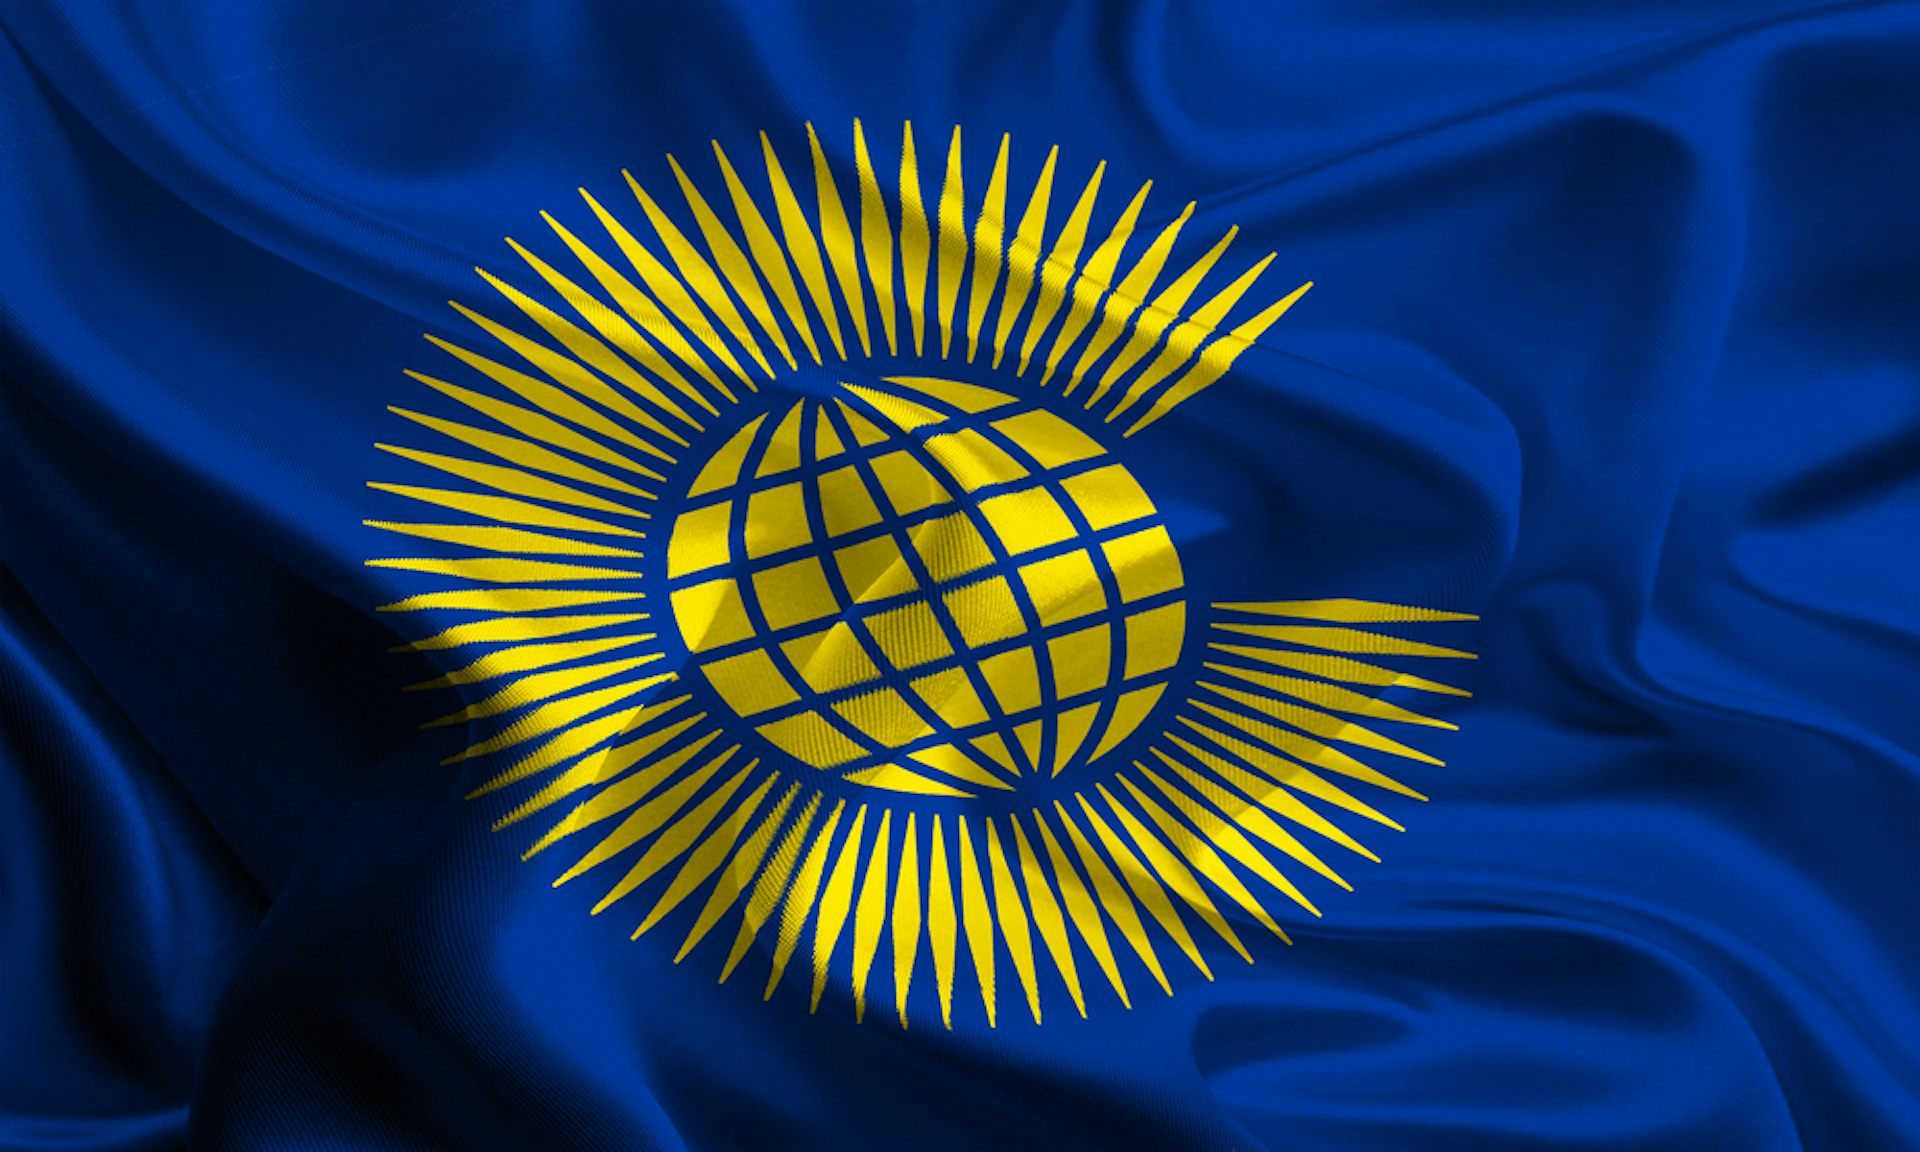 what does it mean to be part of the commonwealth